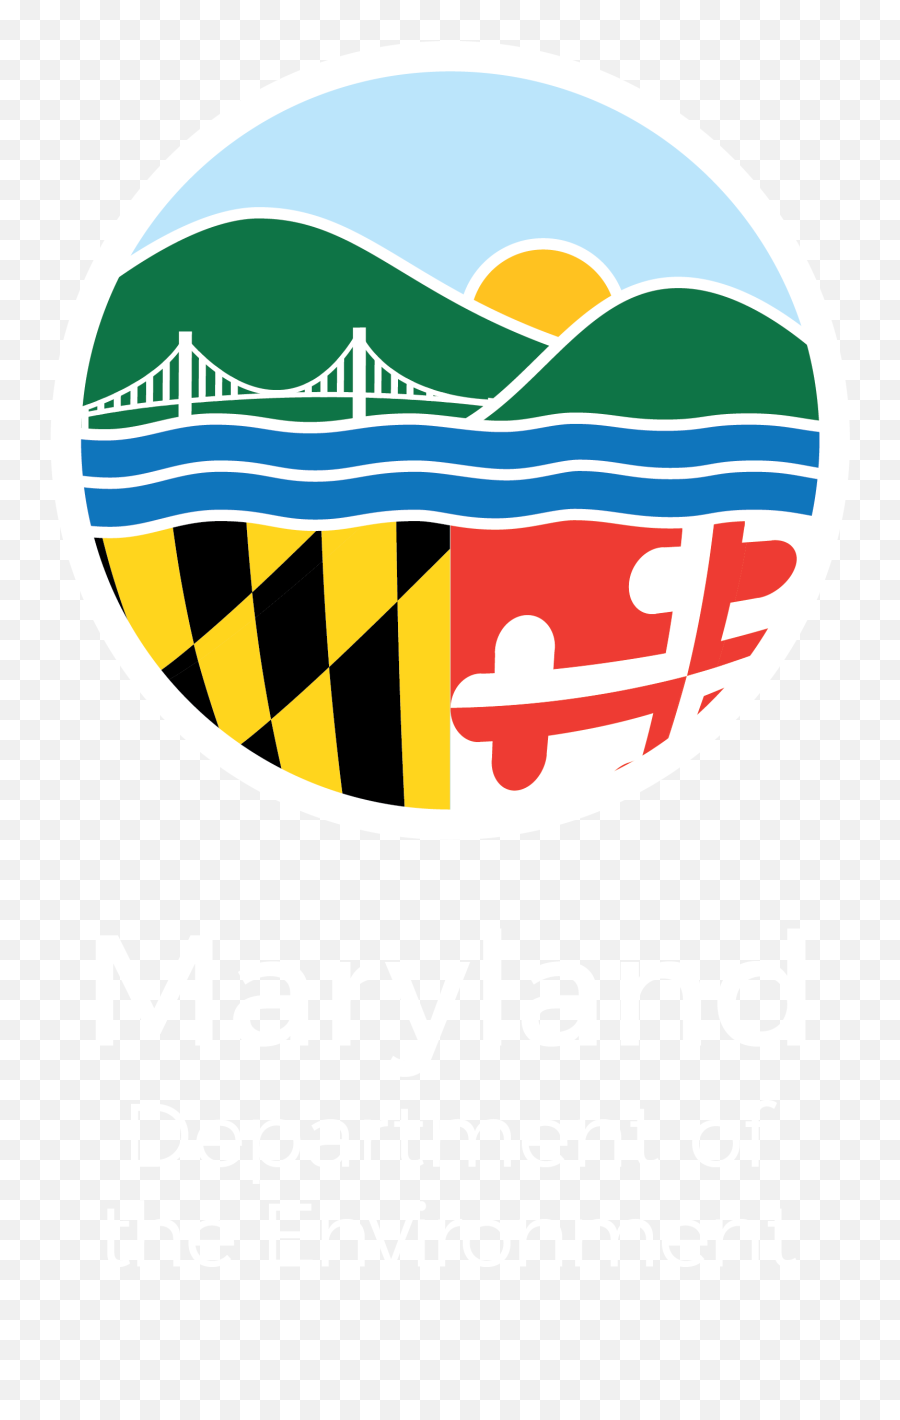 Maryland Vector Flag Md - Maryland Department Of The Md Department Of The Environment Png,Maryland Flag Png